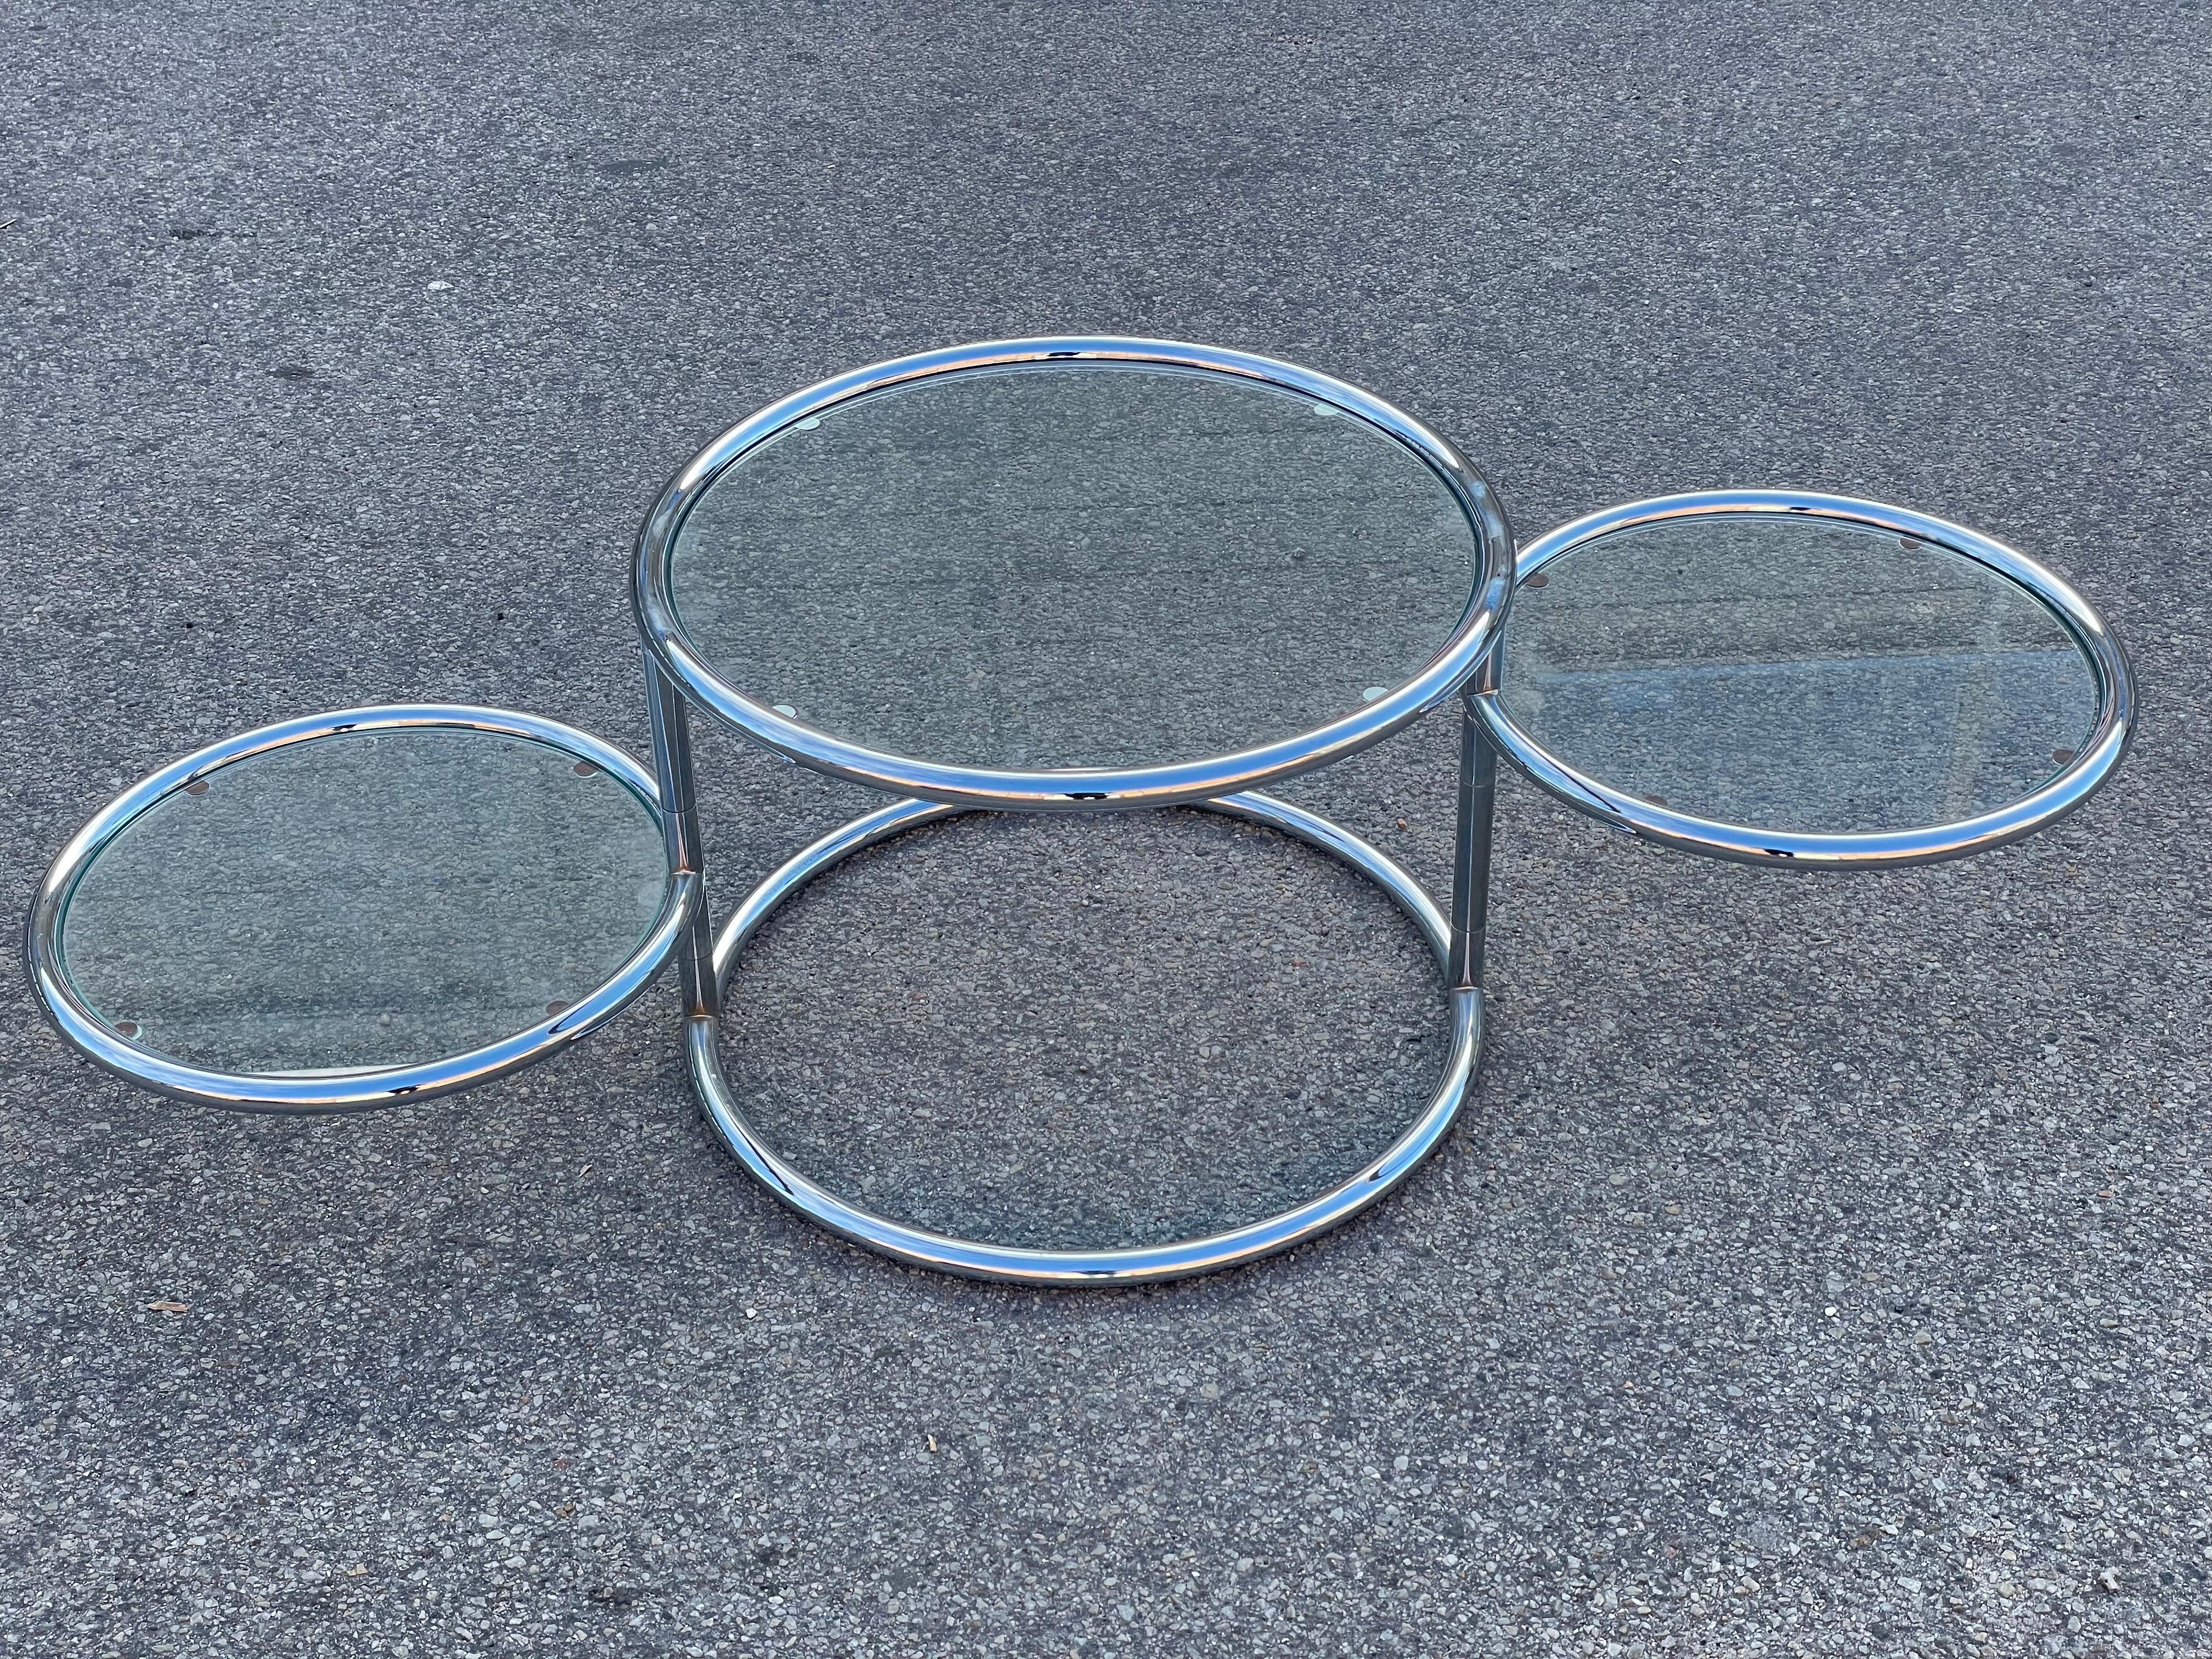 Vintage Italian coffee table for Morex in the 1970s. A chrome coffee table with a frame consisting of three trays that can be pulled out from the central body by means of two lateral joints.
The model of this table was designed by Milo Baughman